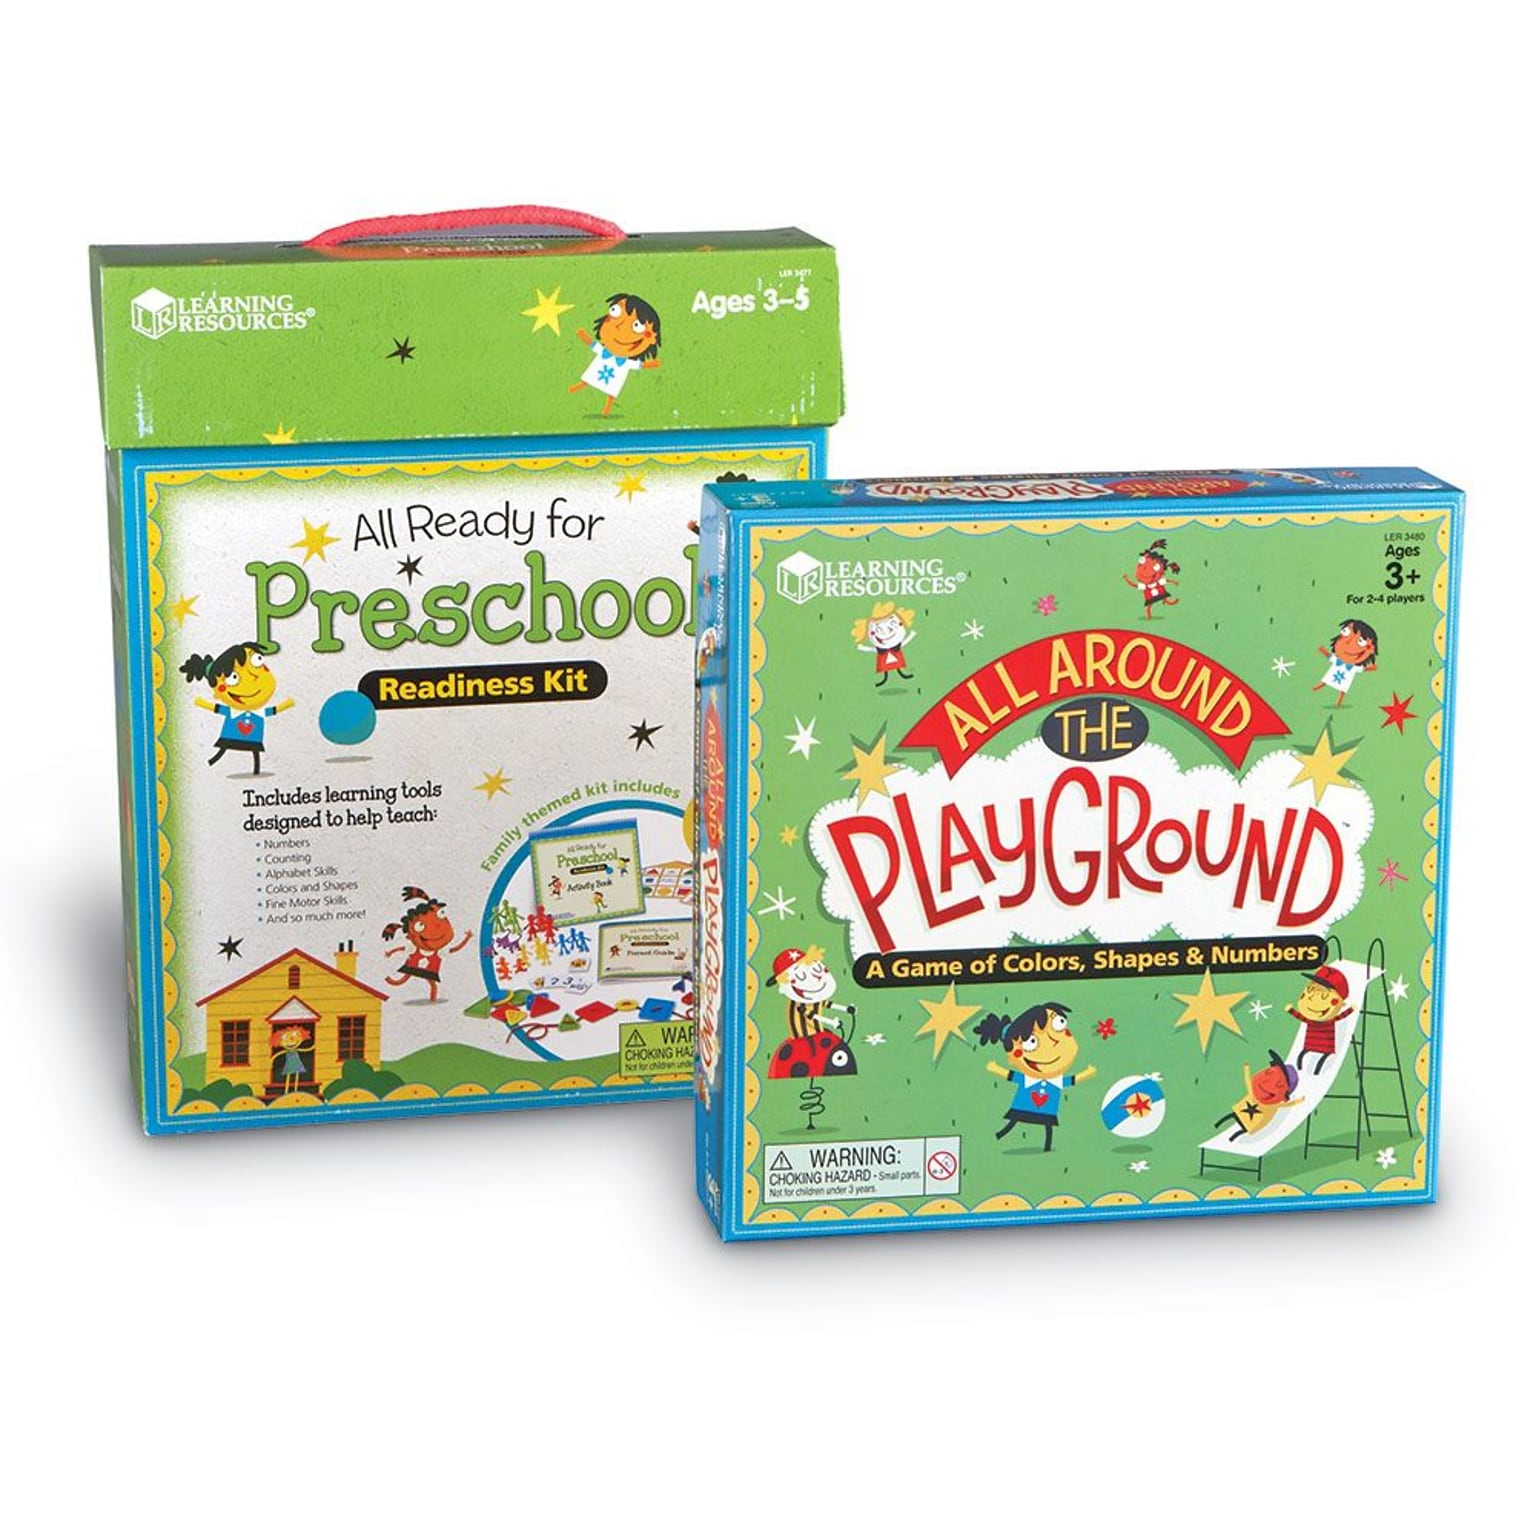 Learning Resources All Ready For Preschool Readiness Kit (LER3477)